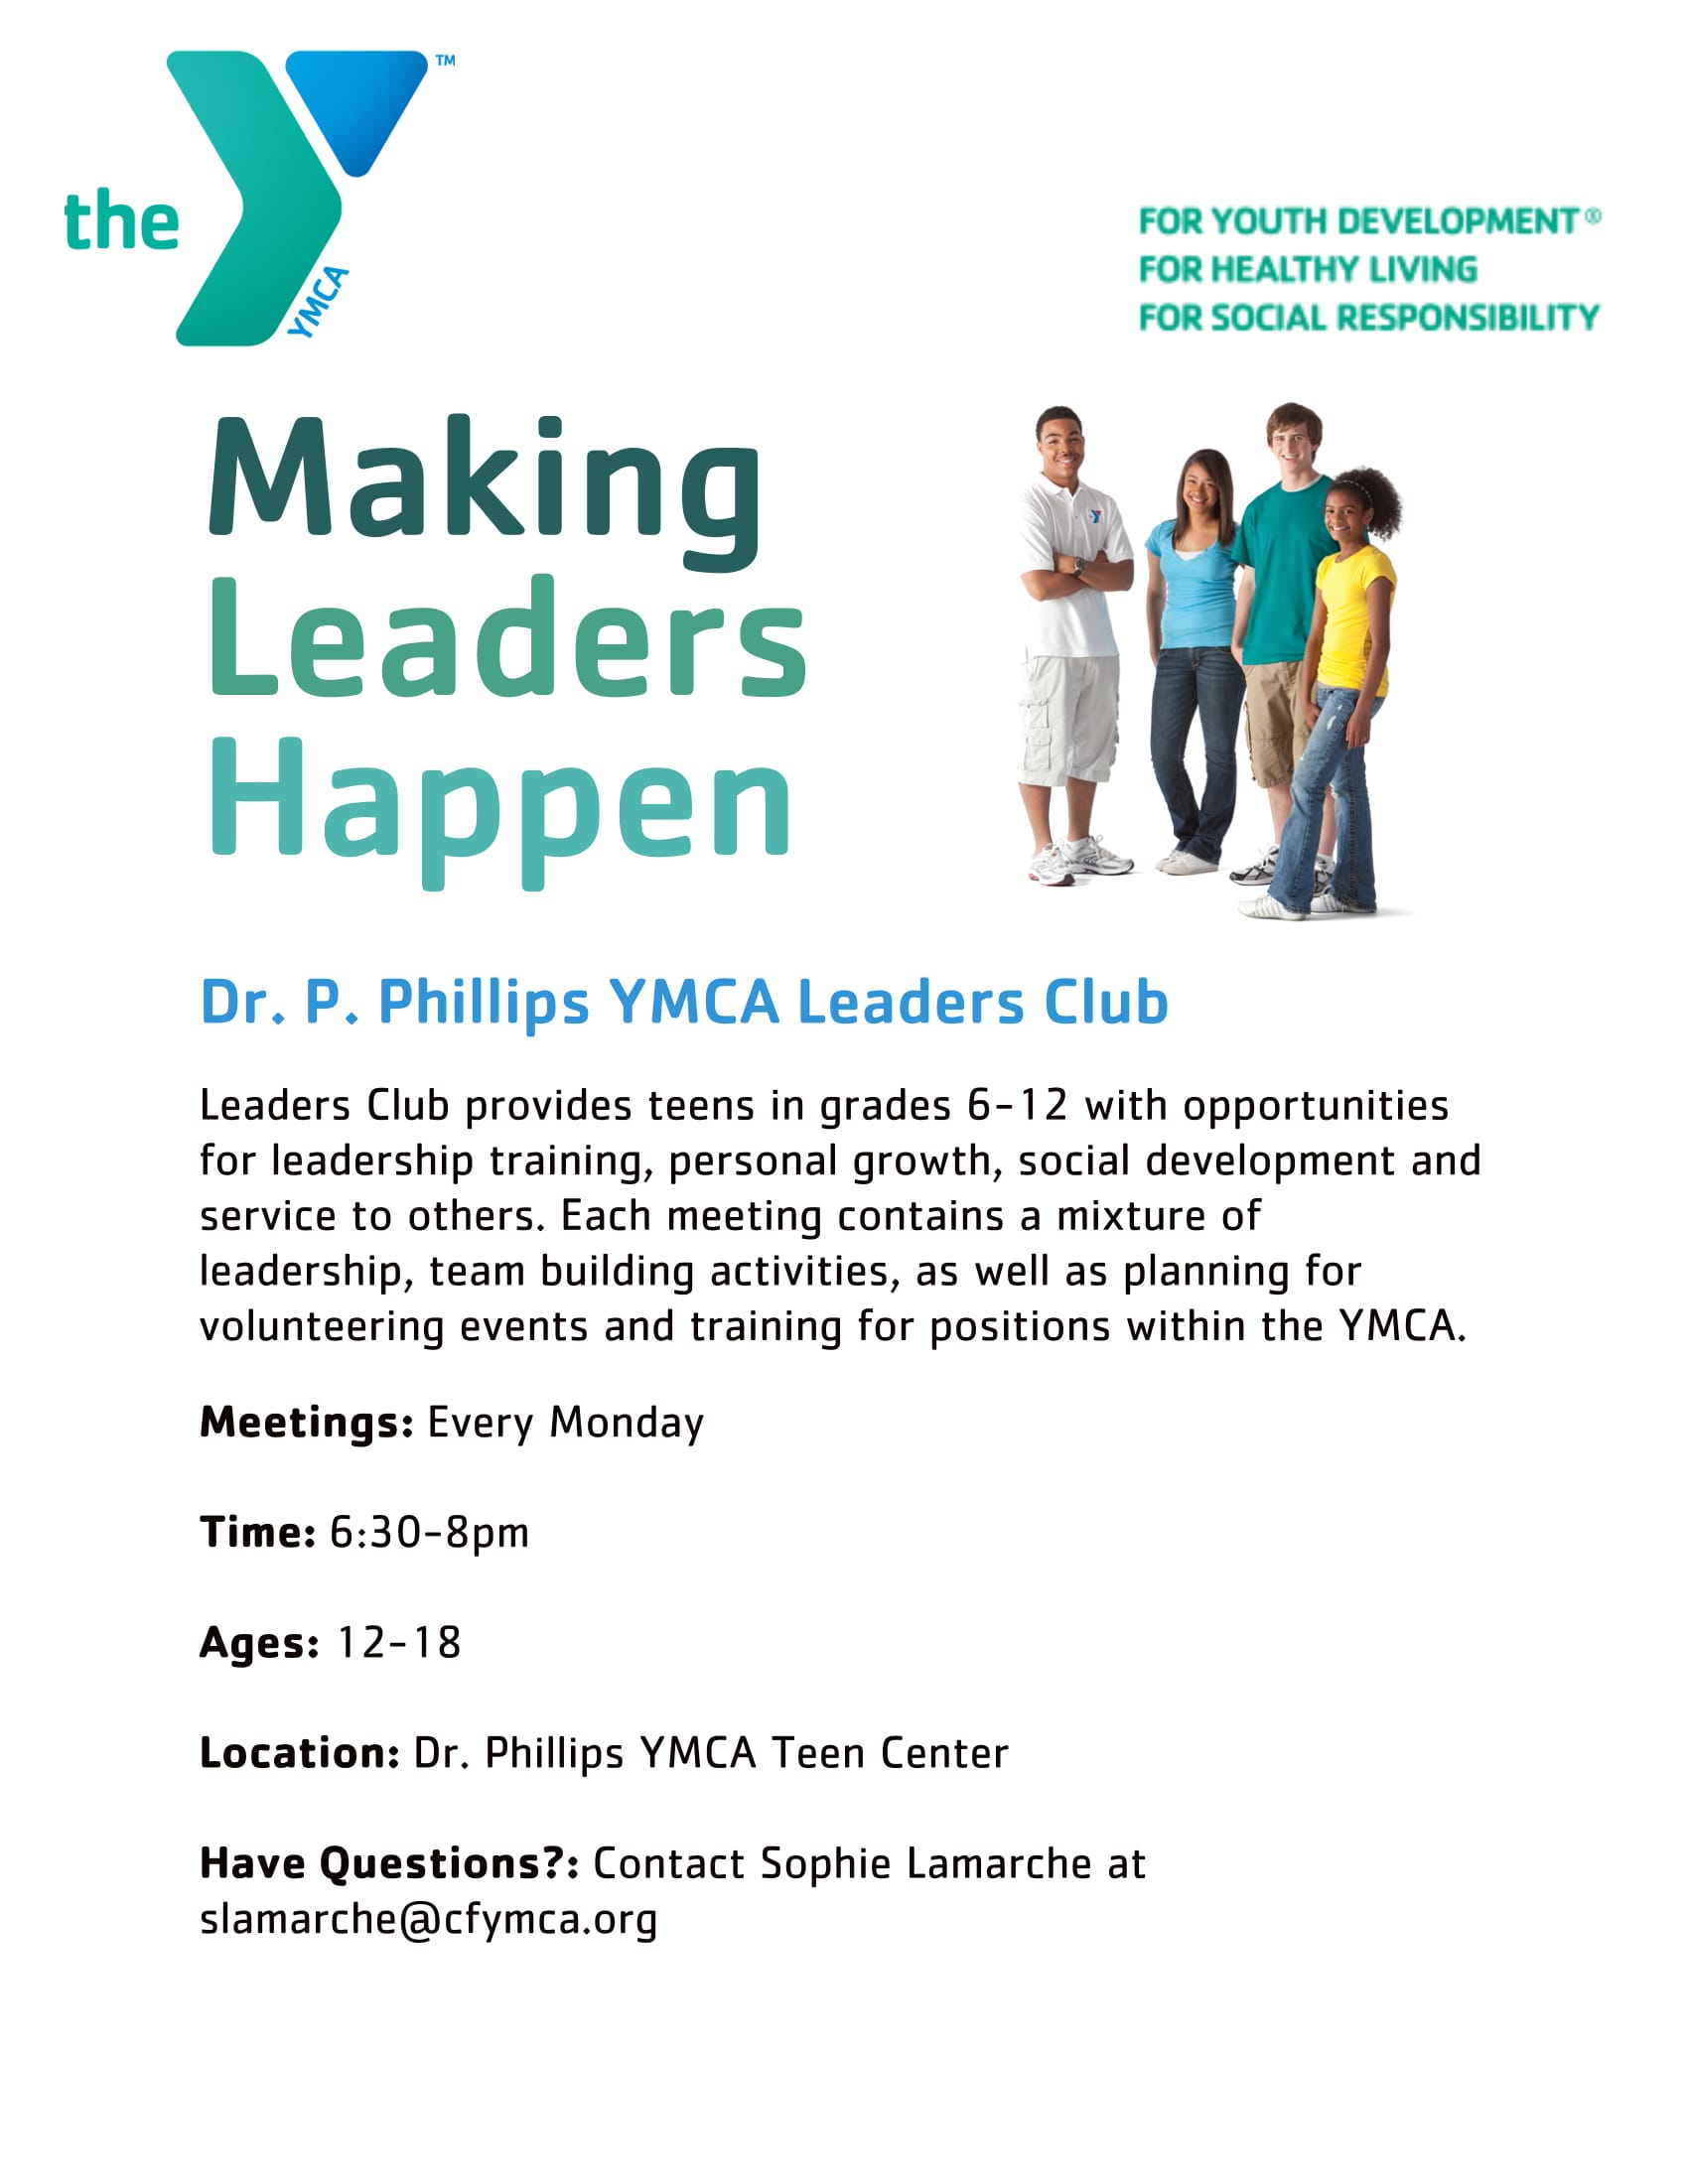 Community Service Opportunity: Dr. Phillips YMCA